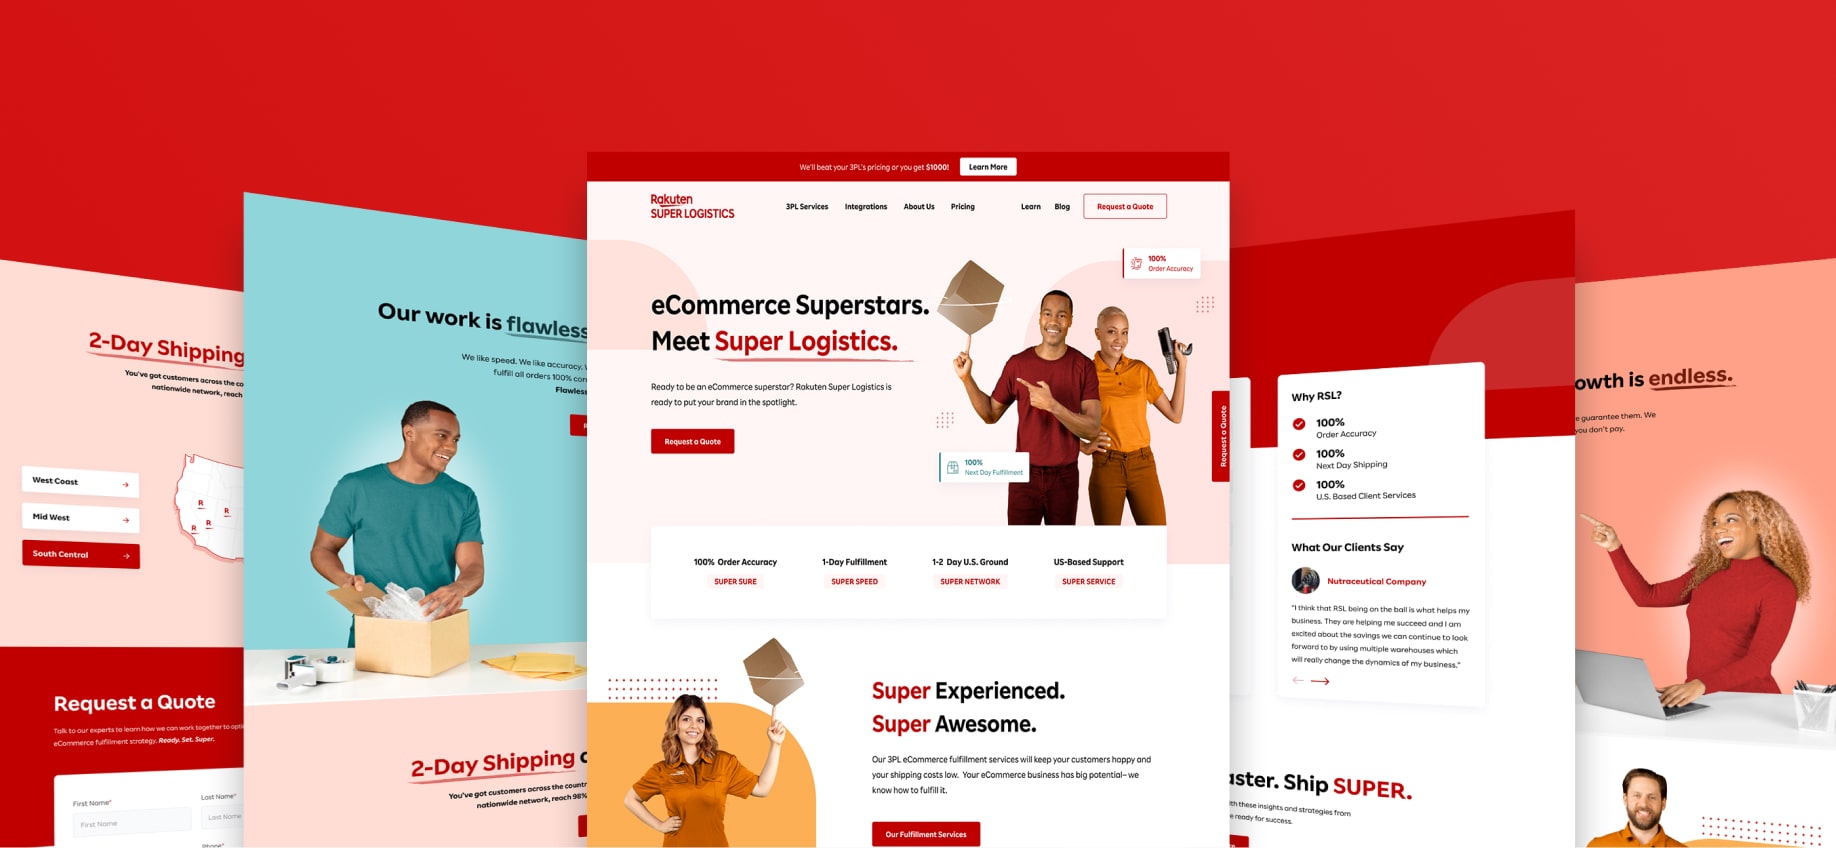 Rakuten Super Logistics landing pages with new look and voice developed by Flux rebranding agency